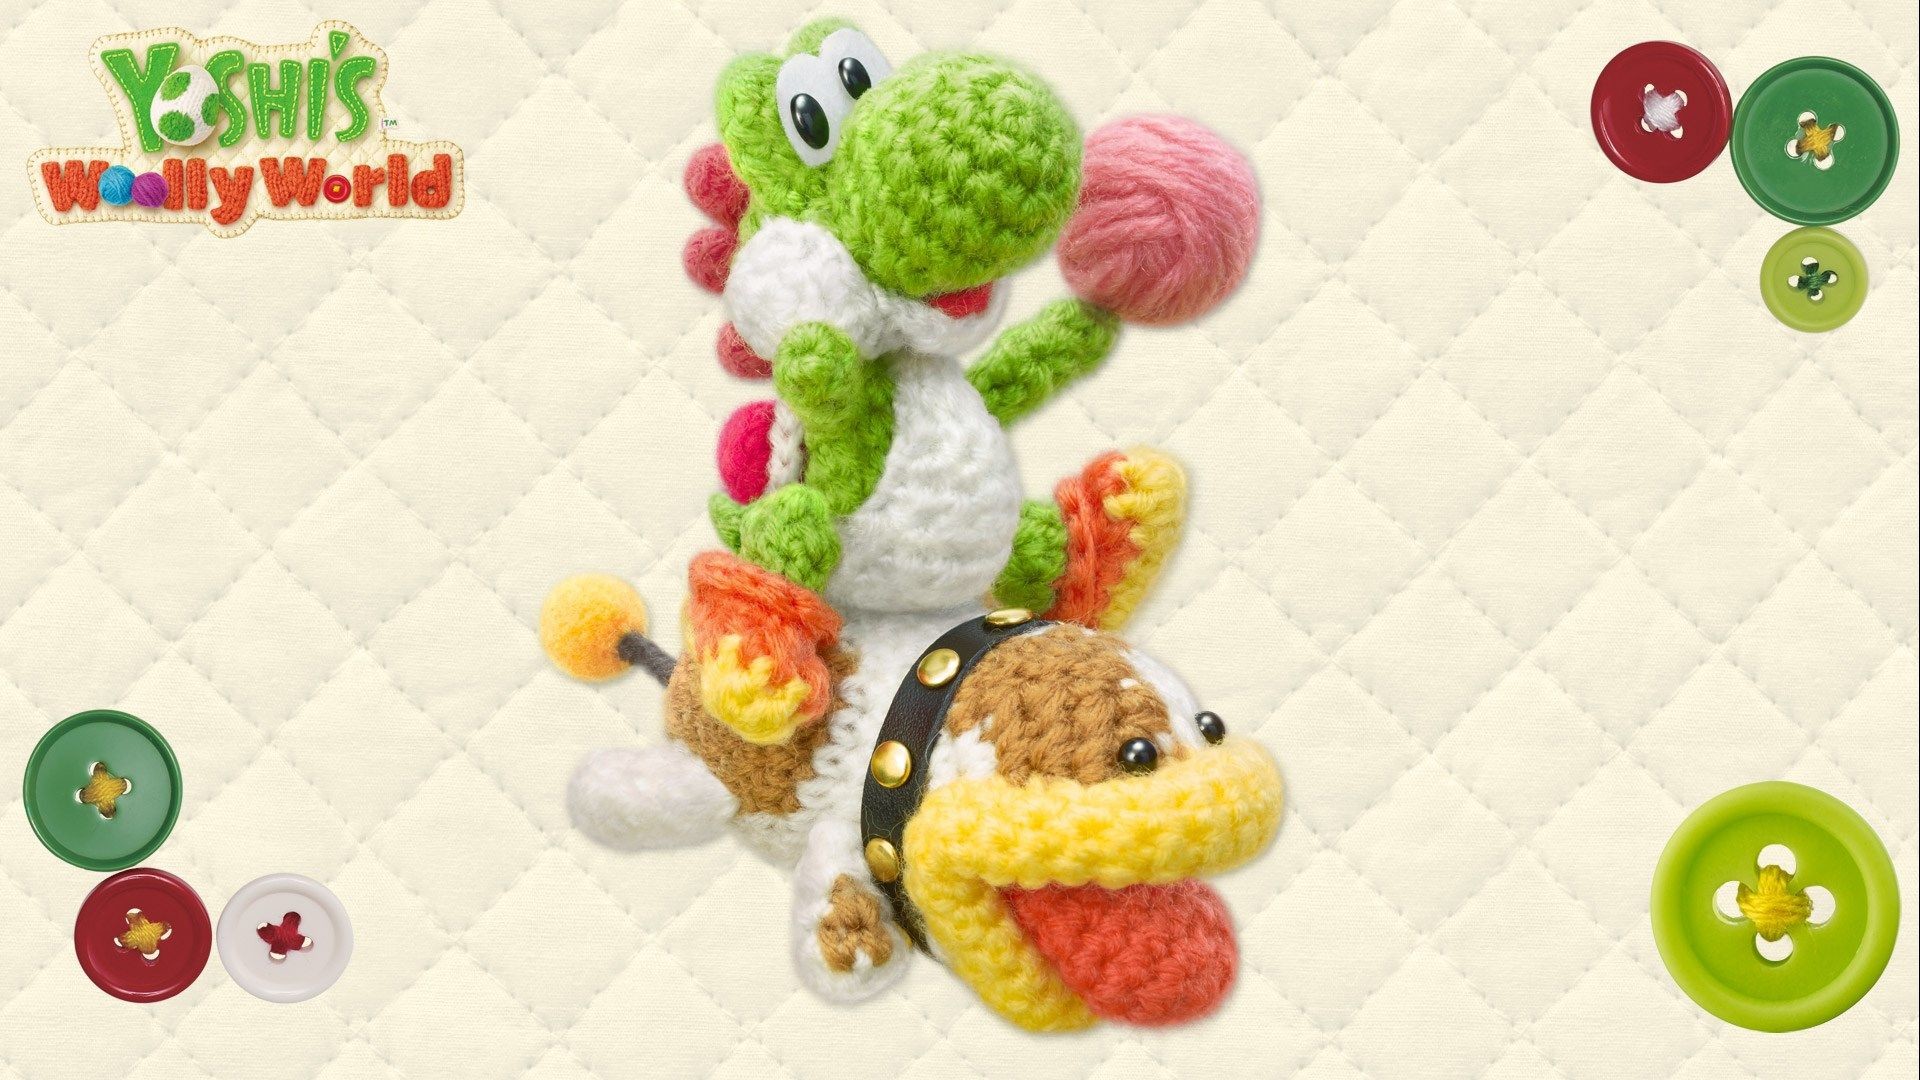 1920x1080 free desktop backgrounds for yoshis woolly world